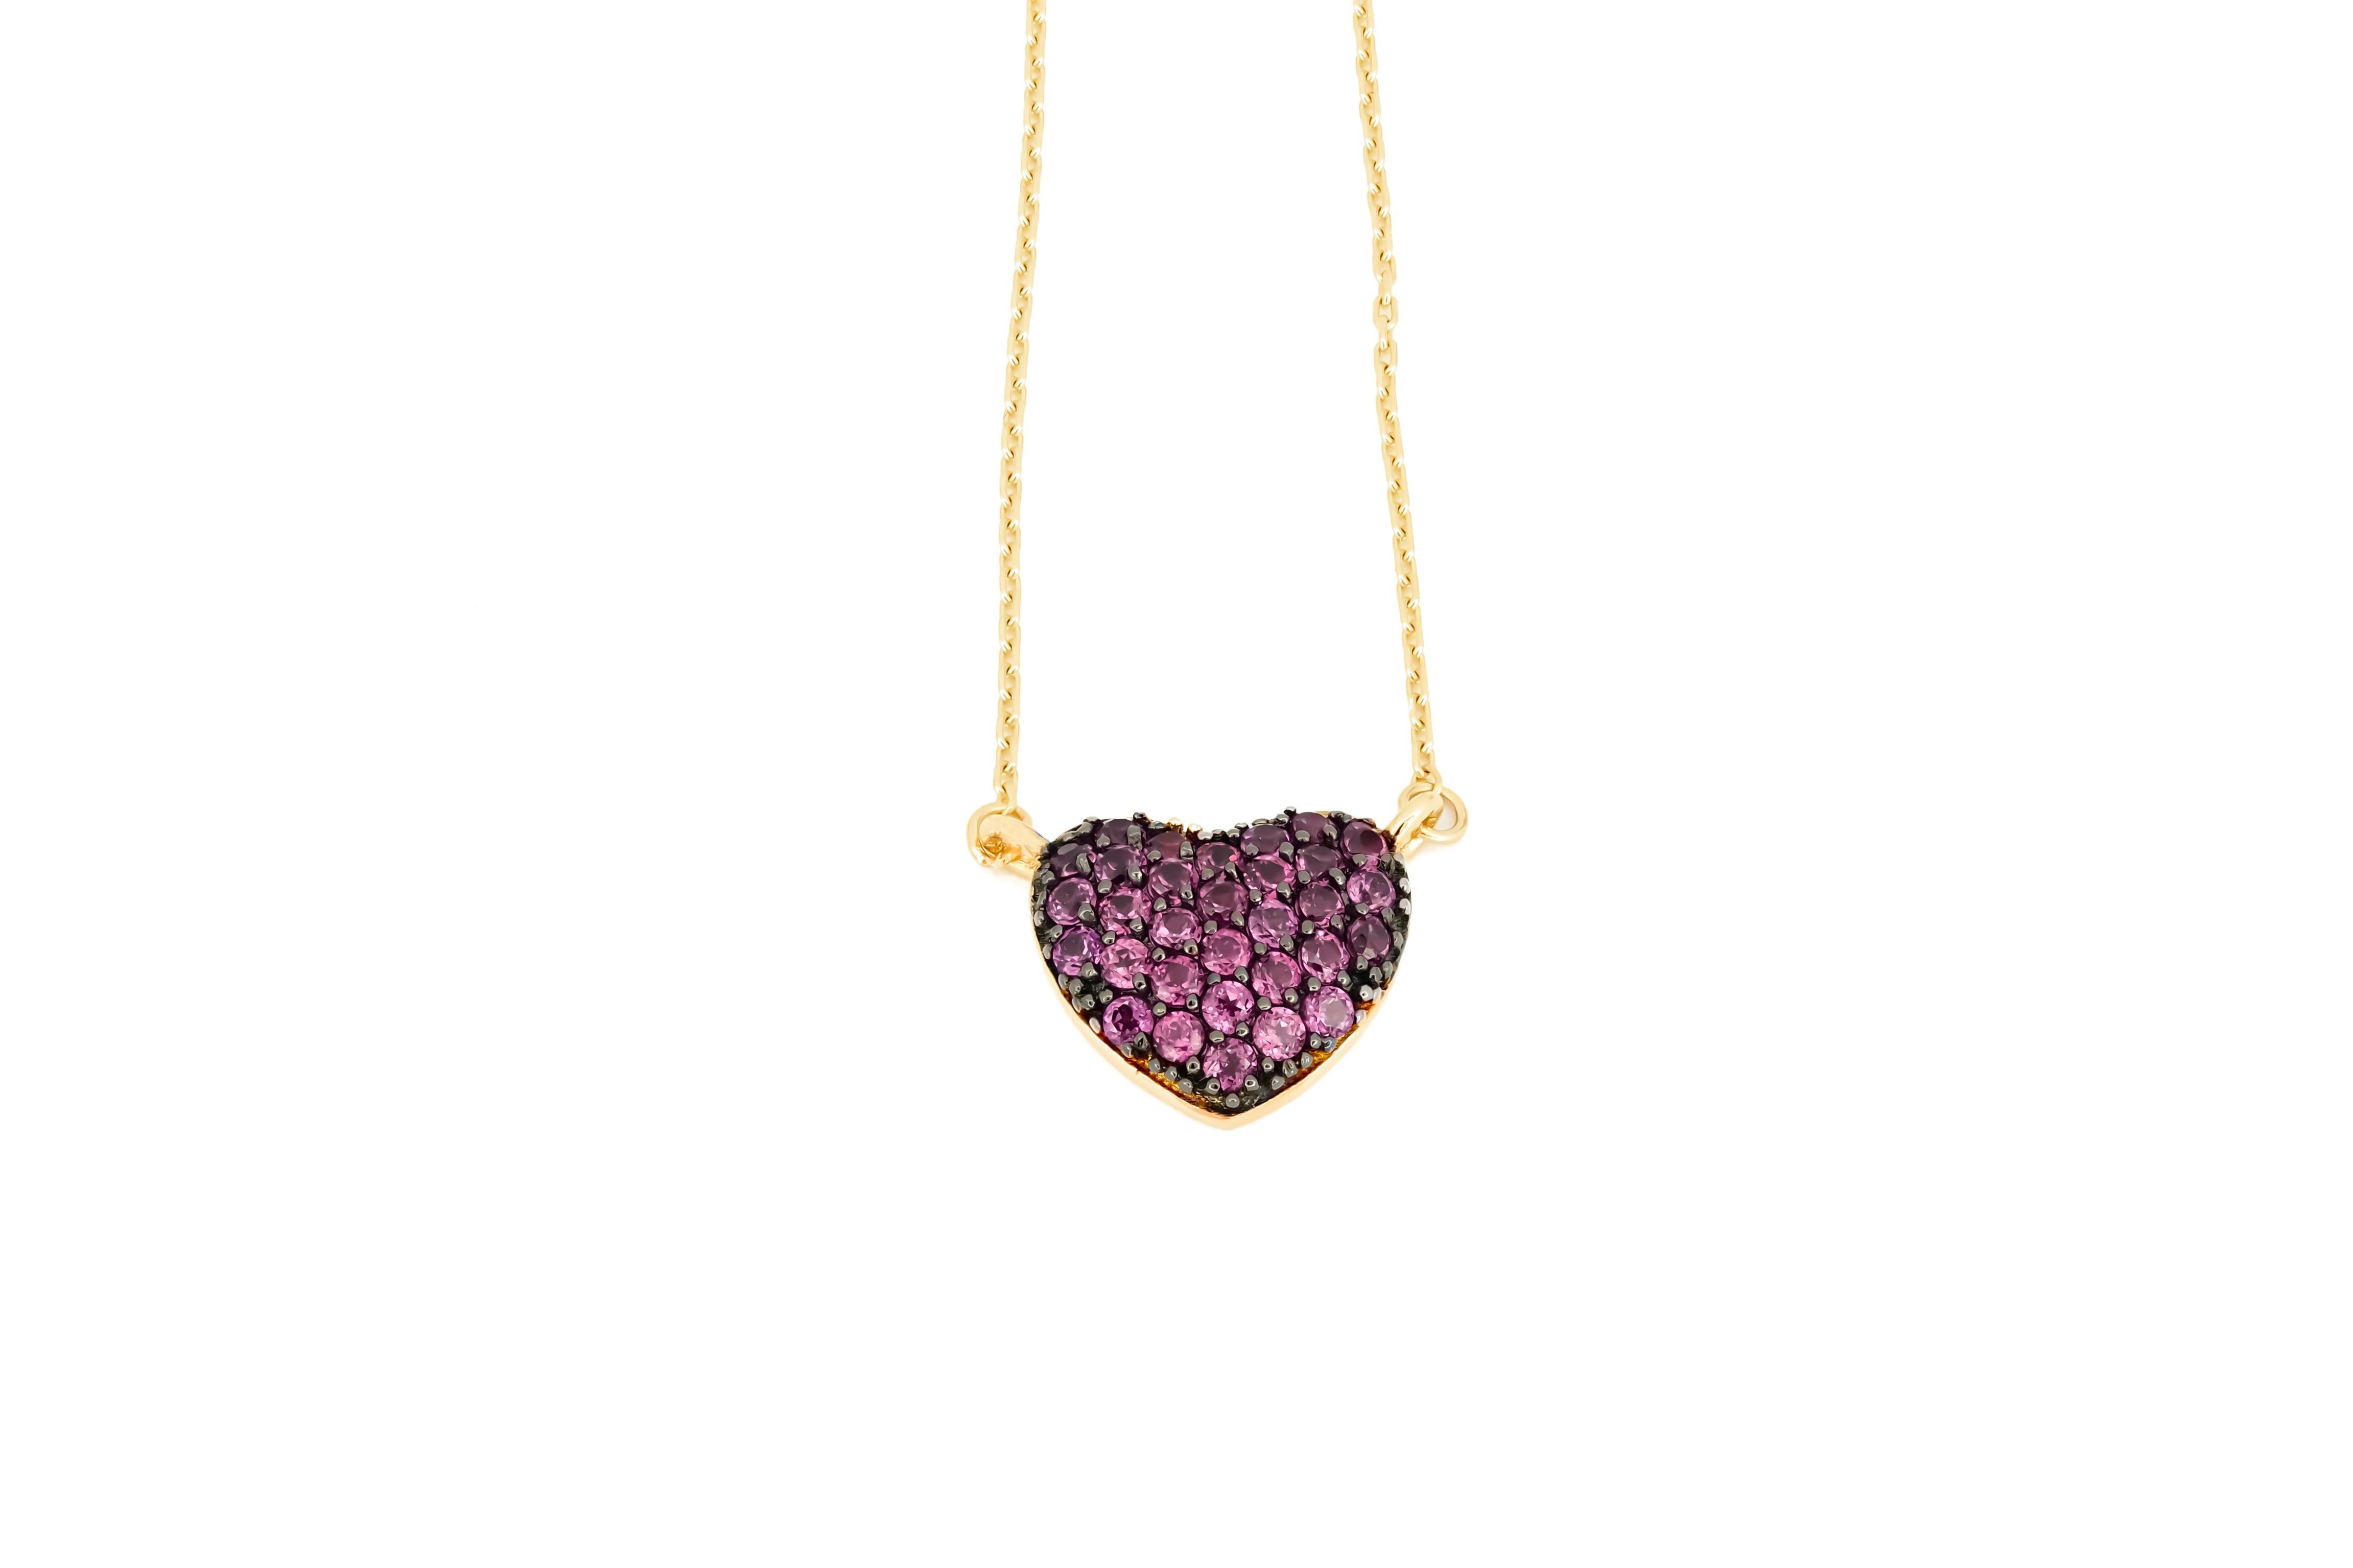 Round Cut Heart Pendant necklace in 14k gold 